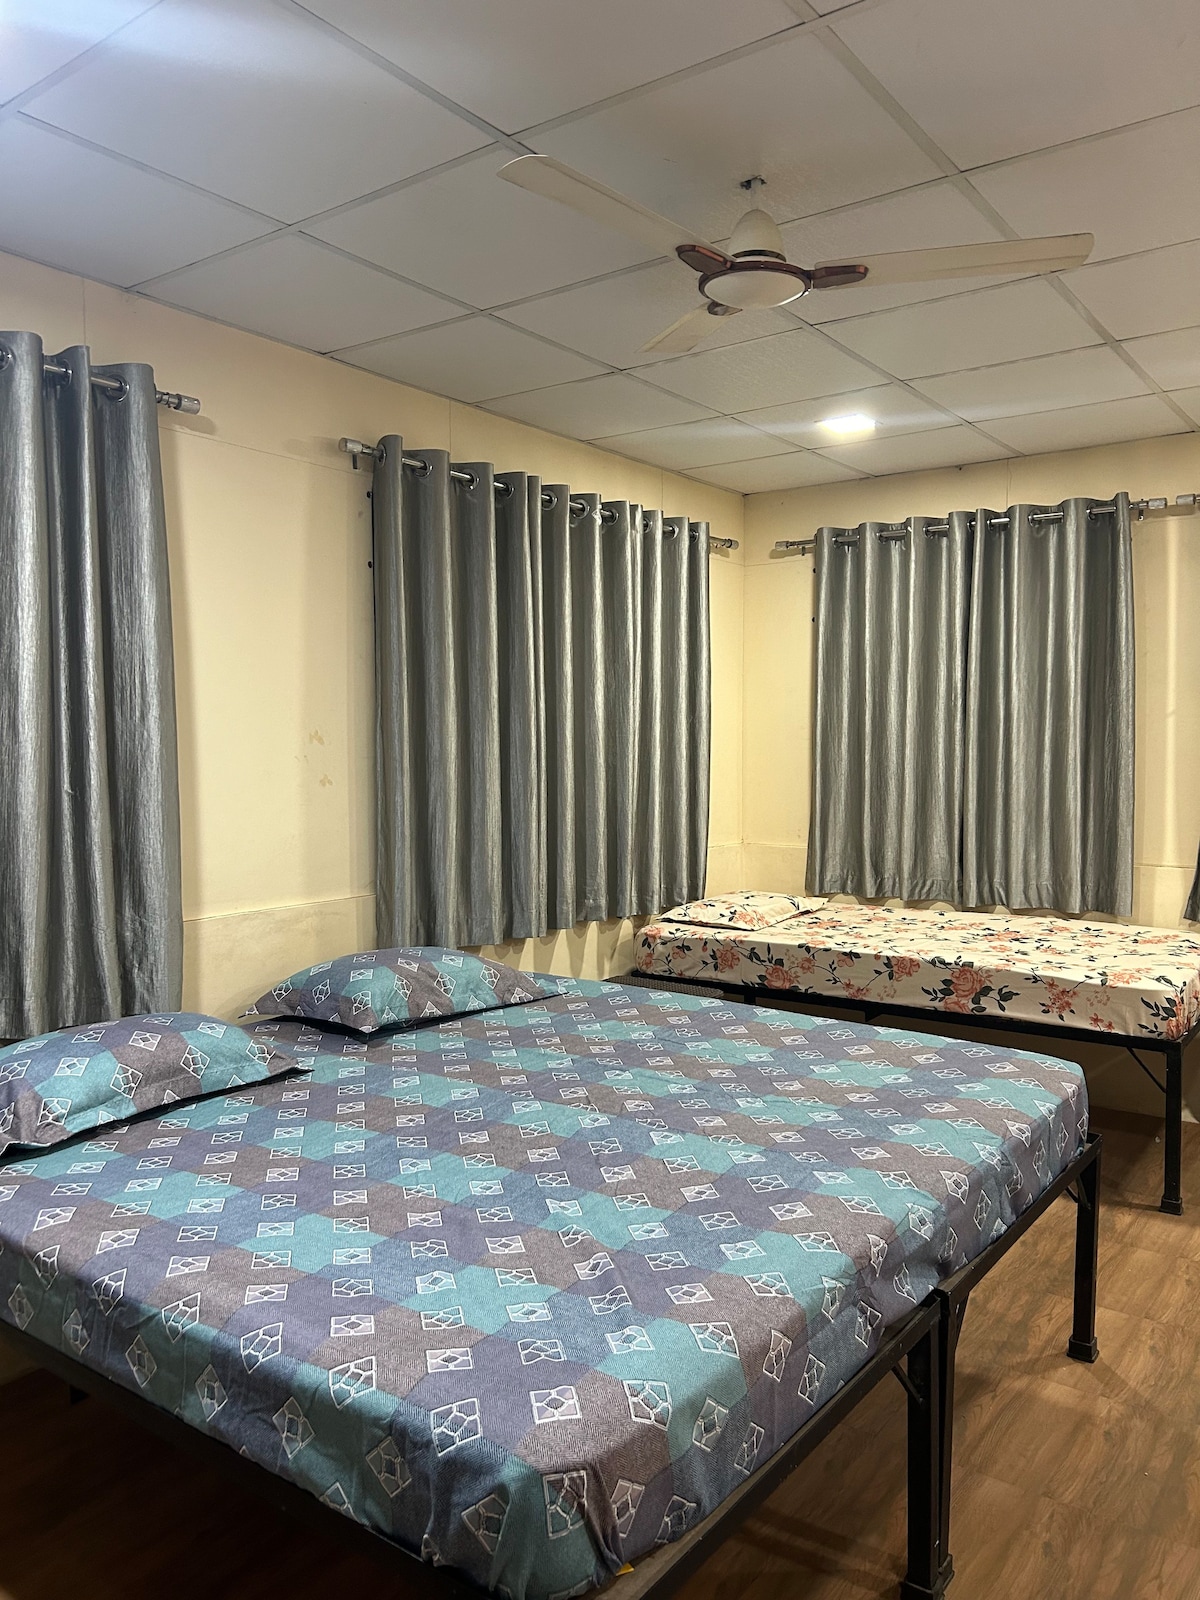 Air Conditioned Room In A Bunglow